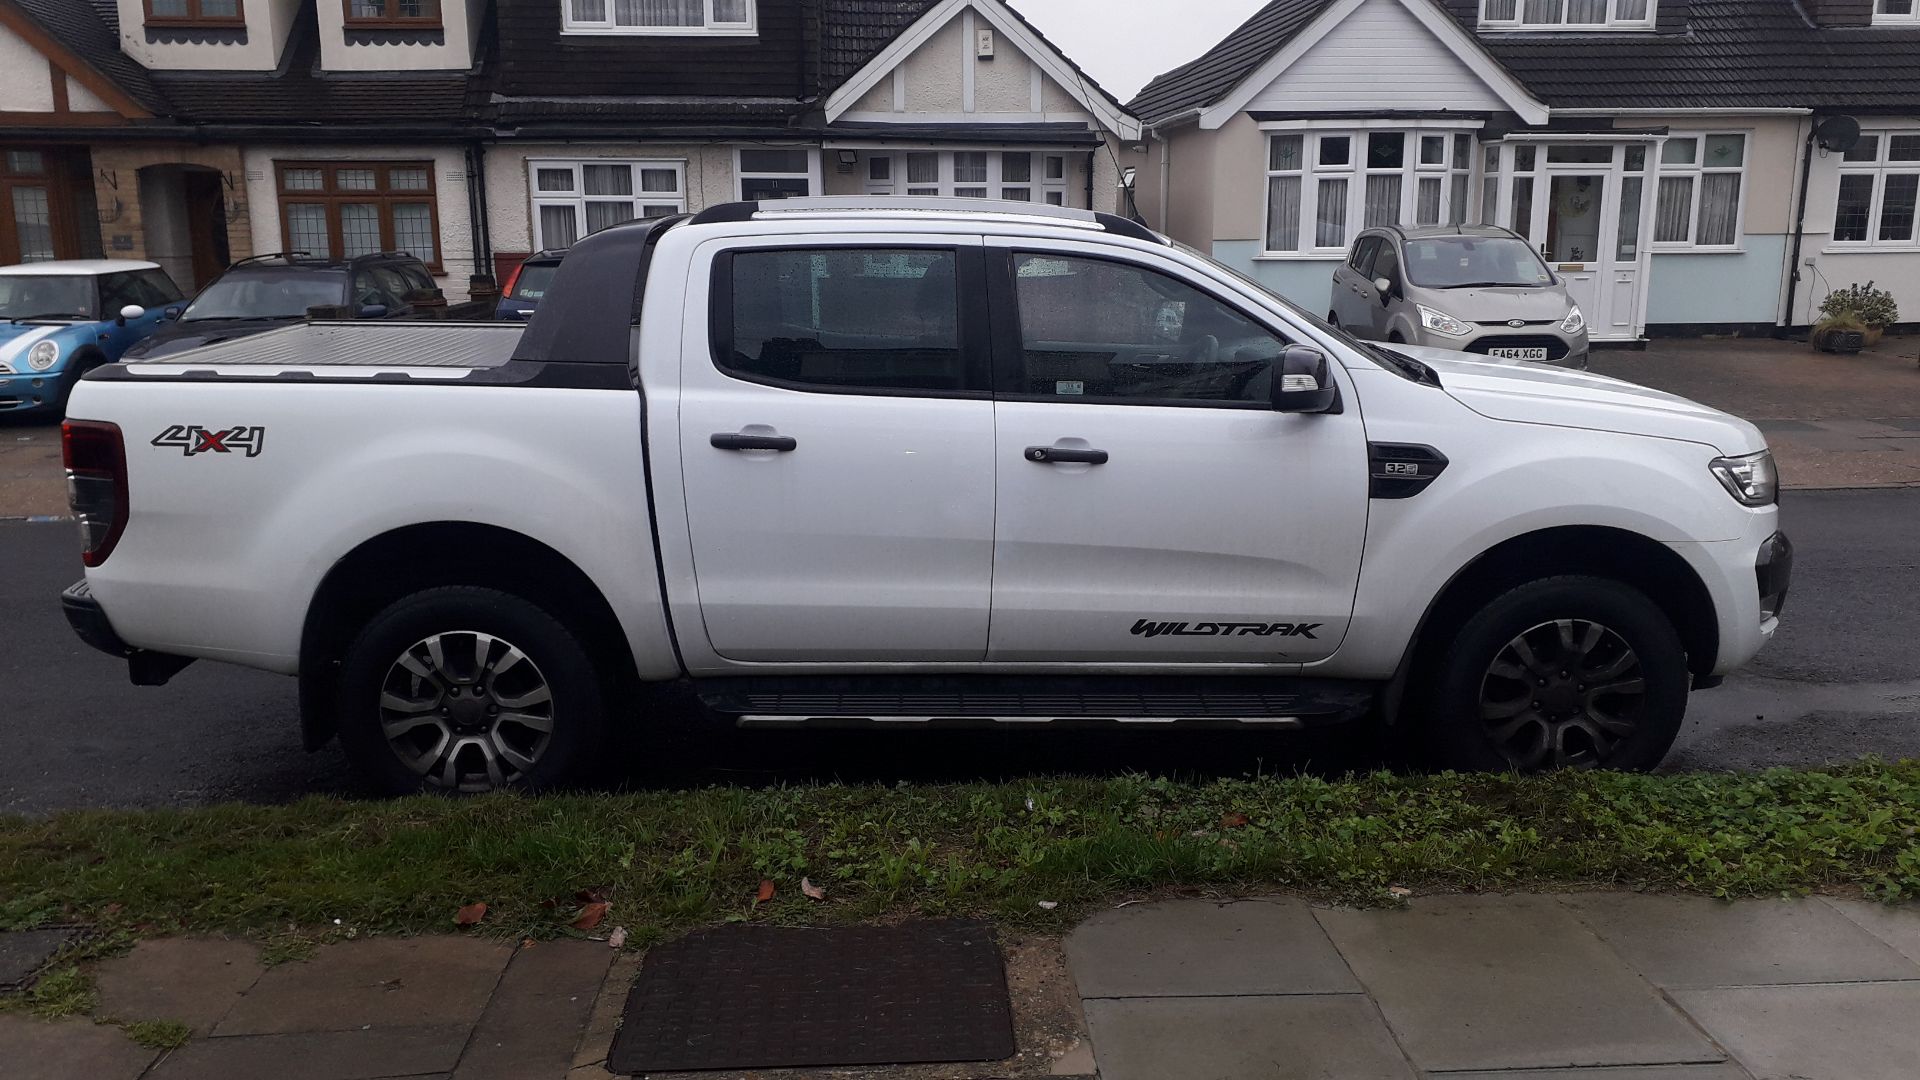 Ford Ranger Wildtrak 3.2 TDCi 200 Auto Double Cab Pick Up (2017) - Image 8 of 26